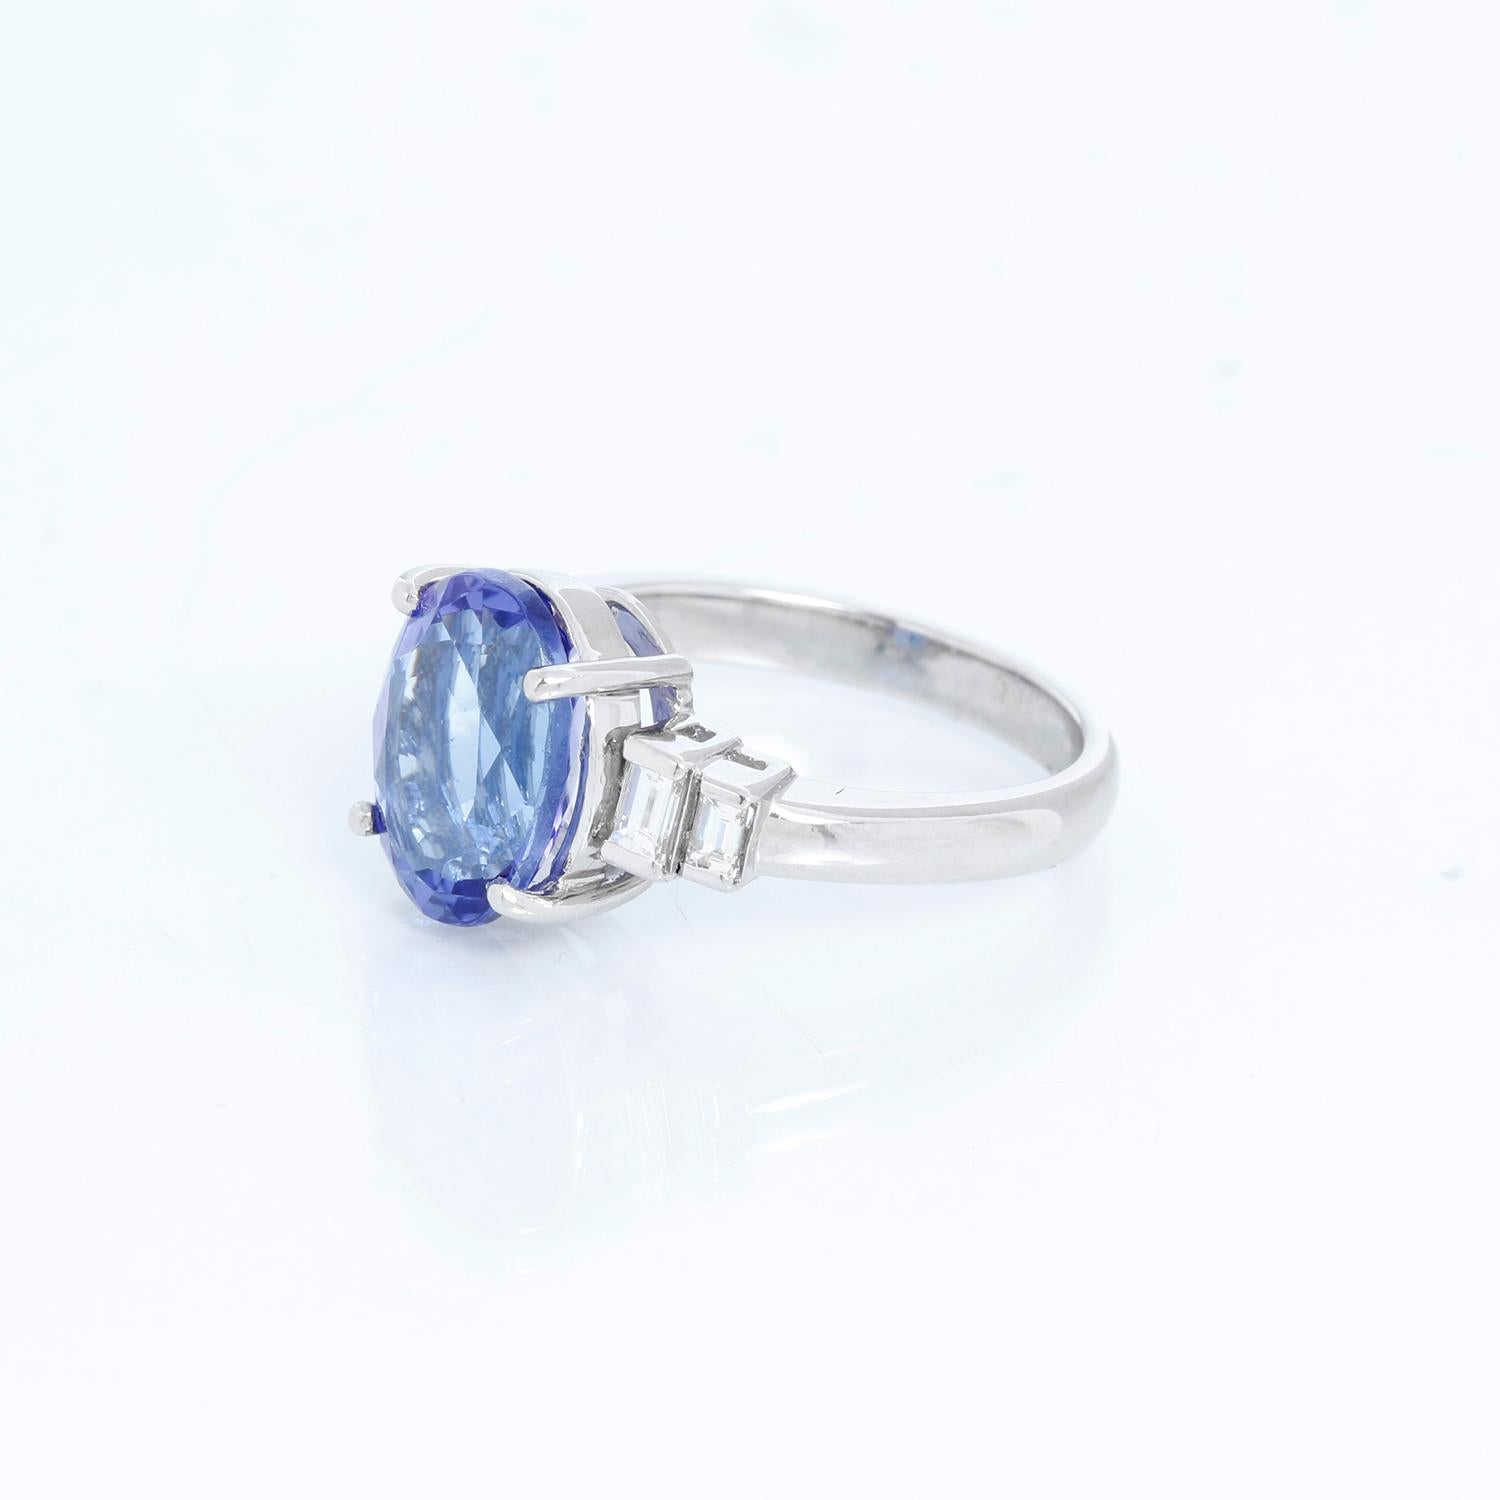 Oval Shaped Tanzanite with Diamonds Platinum Ring Size 7 - Center oval stone set in Platinum with two baguette diamonds on each side. Size 7 but can be sized. Pre-owned with DeMesy box .